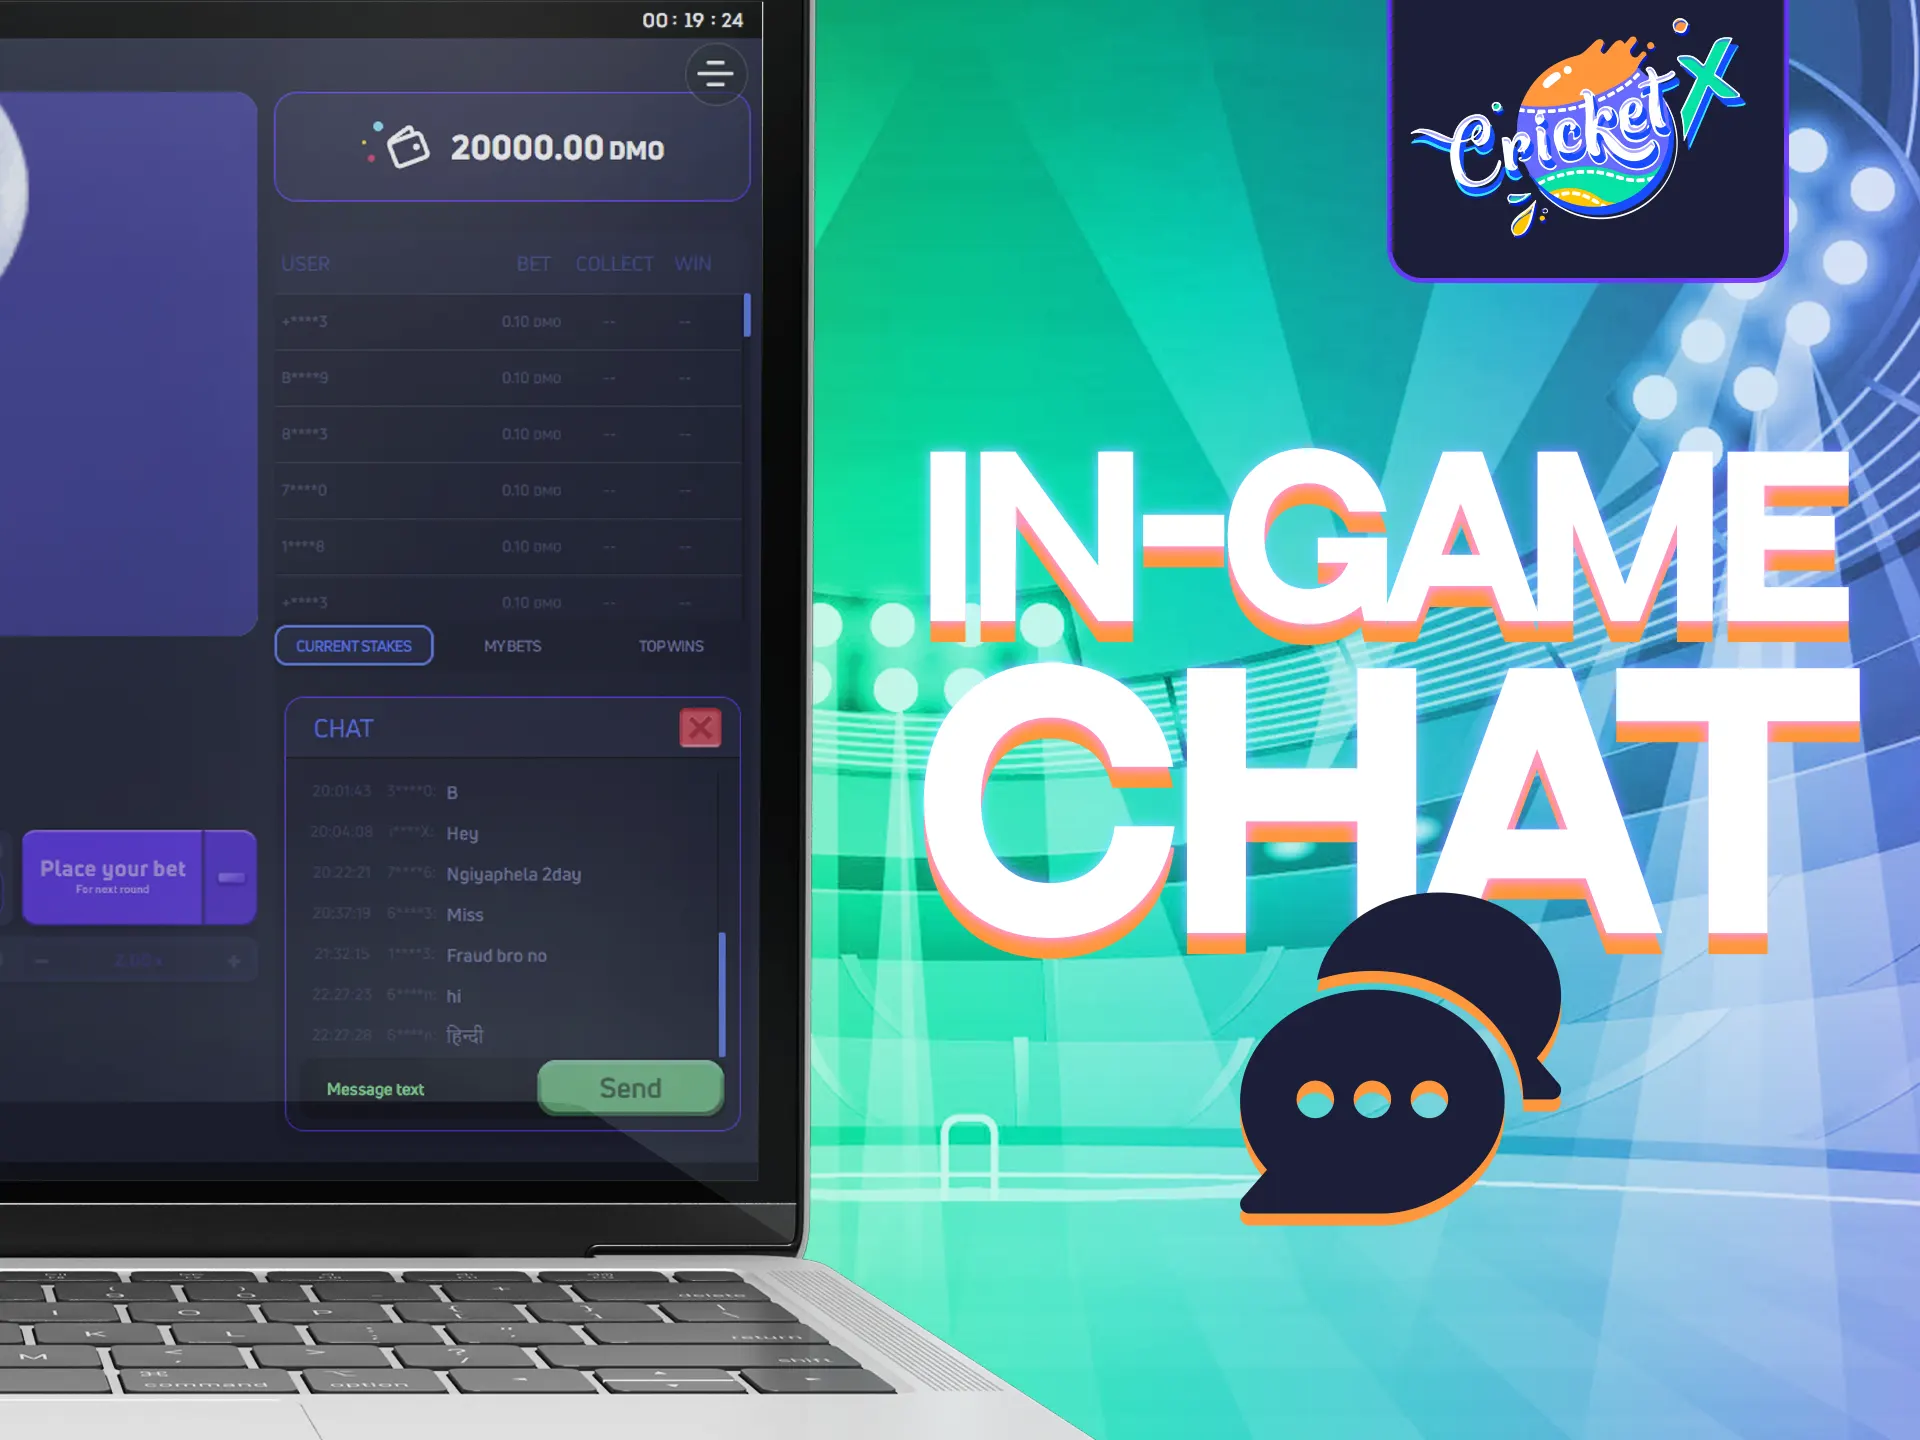 Chat with other players in the in-game chat of Cricket-X.